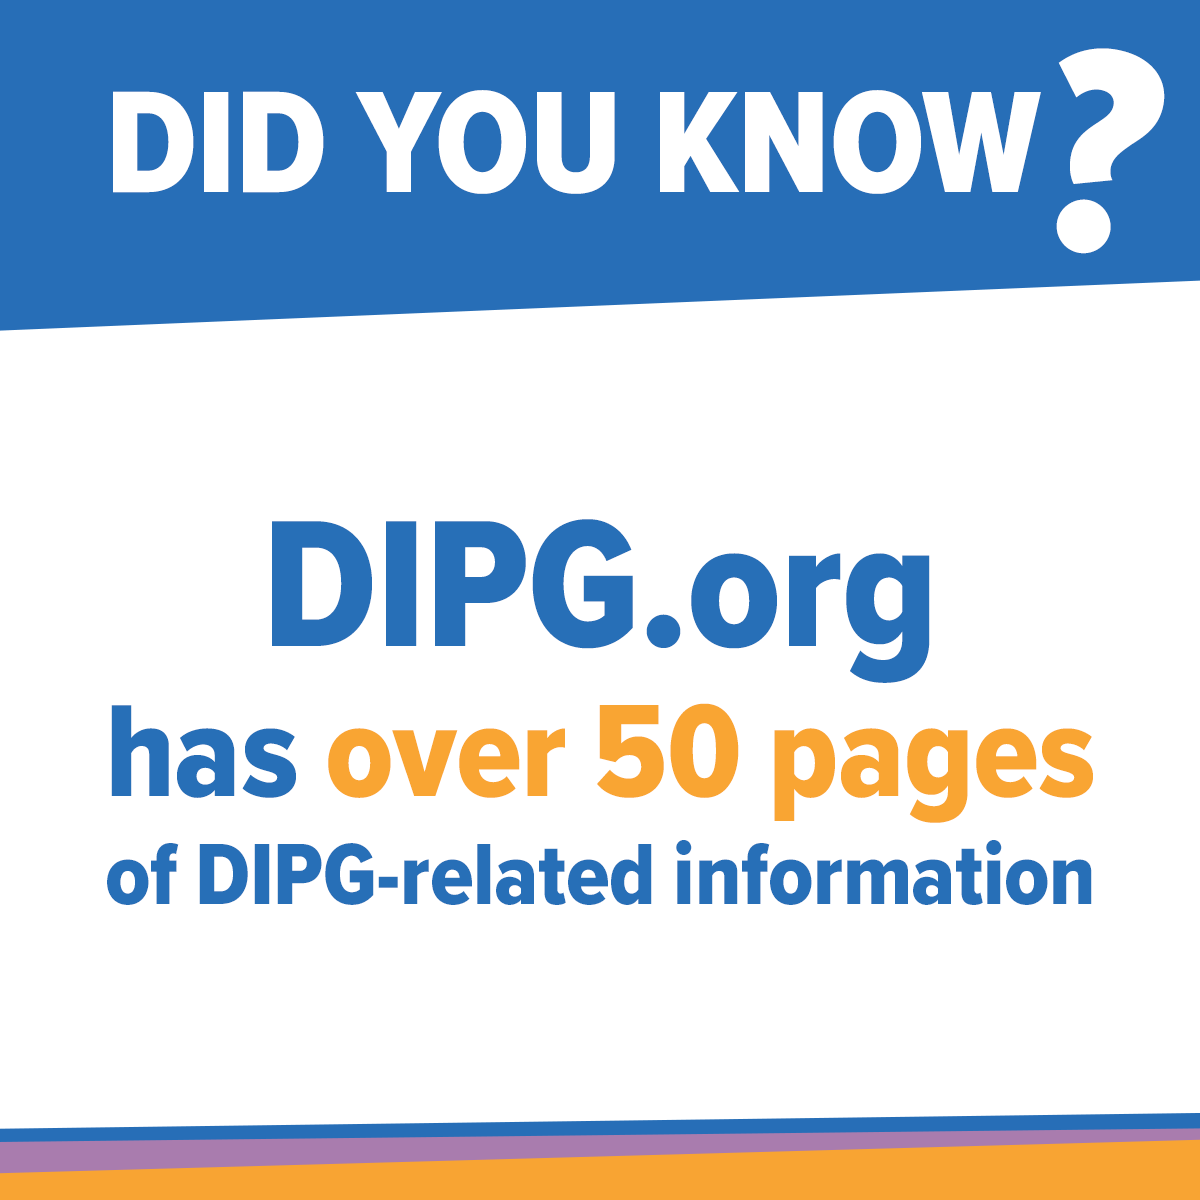 DIPG.org has 50 pages of DIPG content